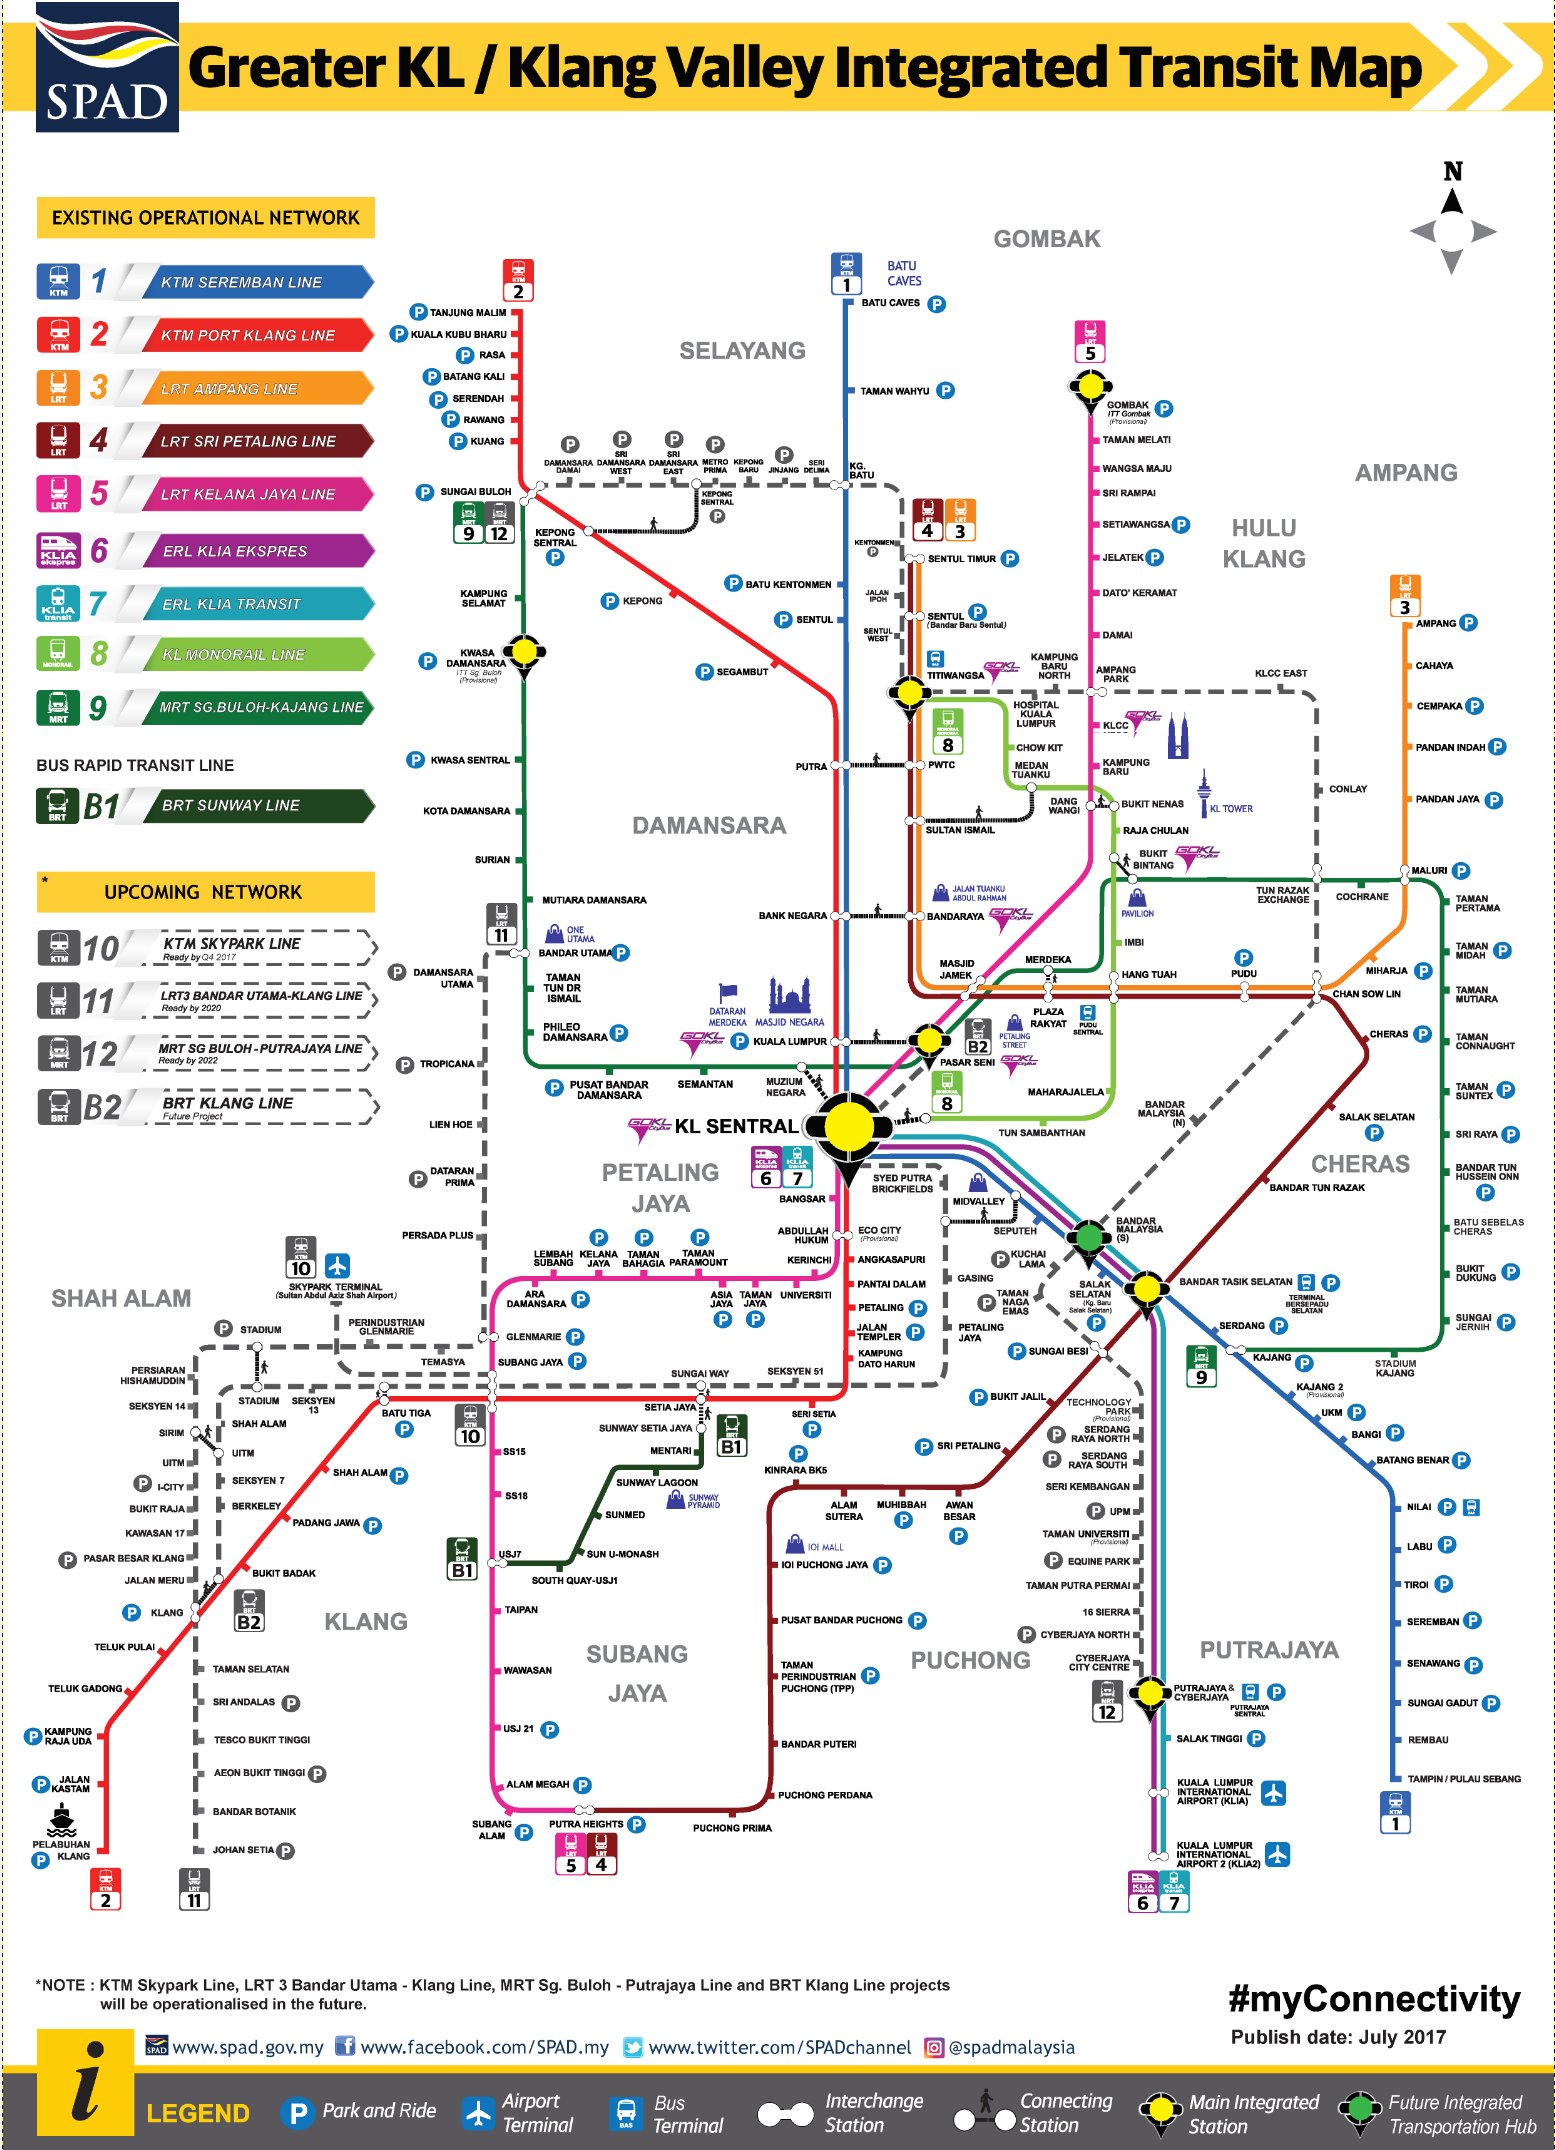 Klang Valley Greater Kuala Lumpur Integrated Rail System The